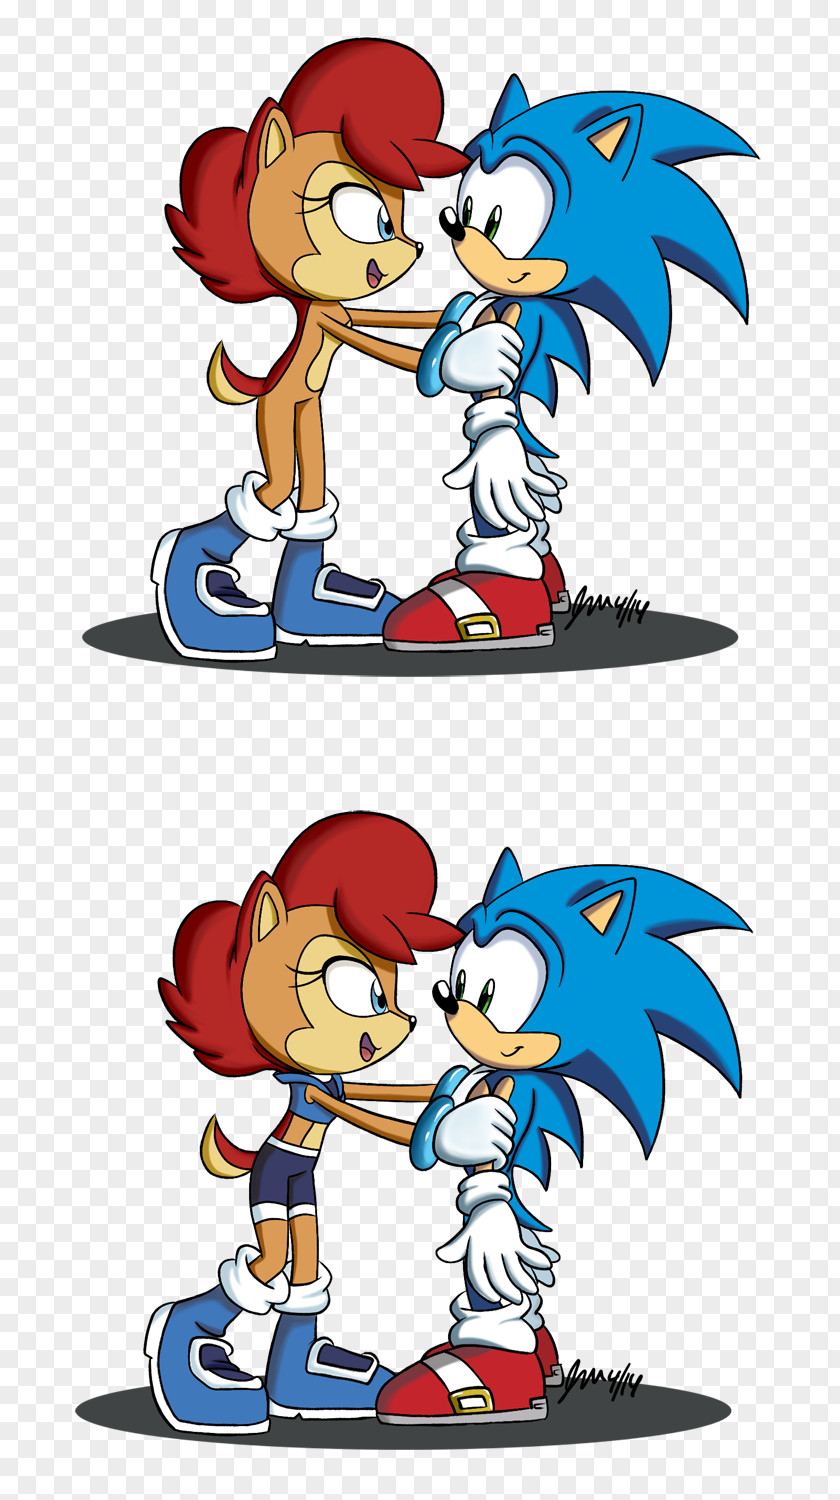 Acorn Sonic The Hedgehog & Sally Princess YouTube Tails PNG